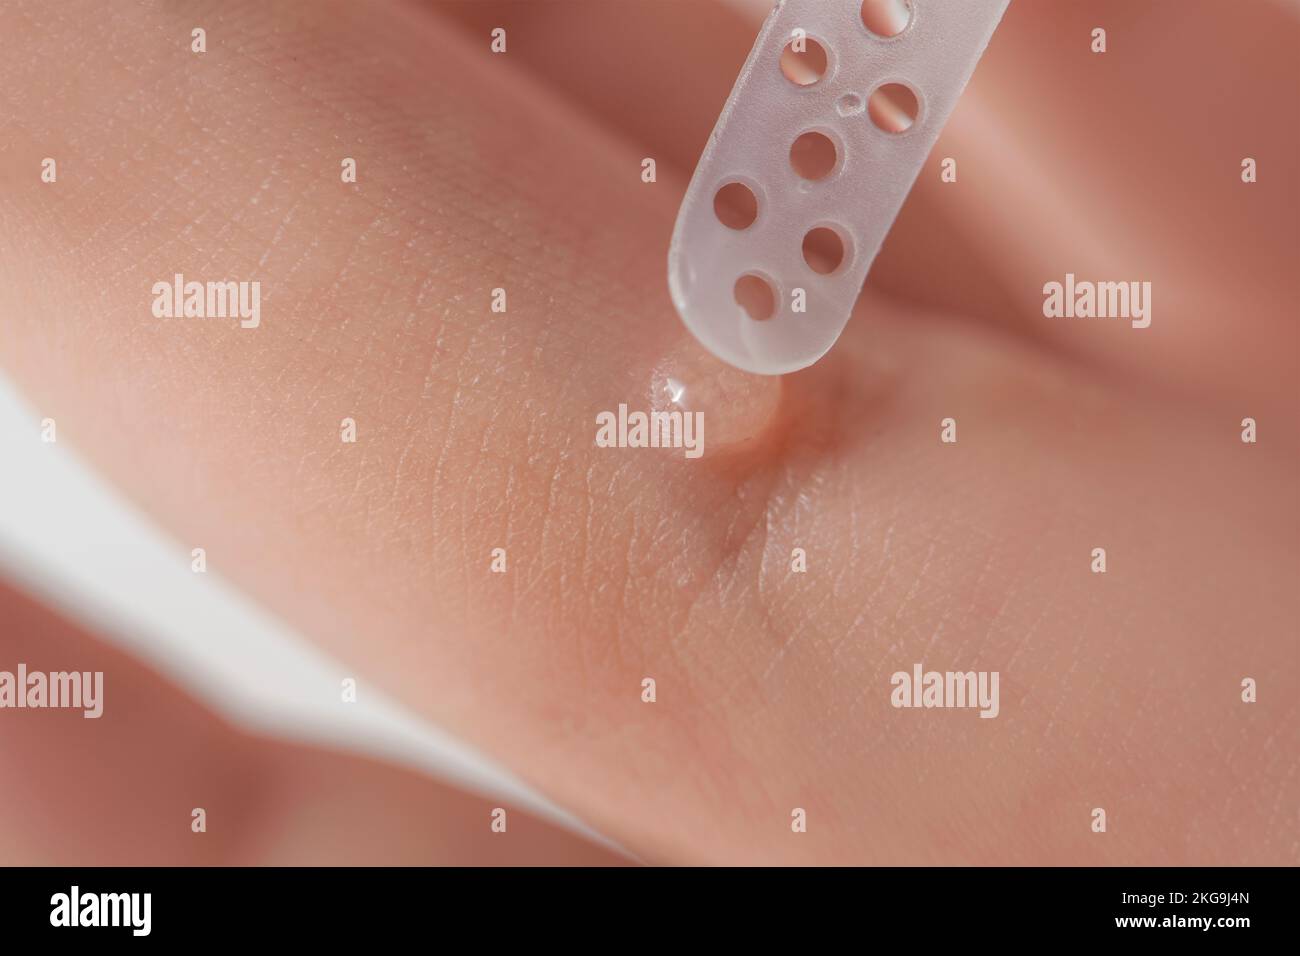 Apply the medicine to the wart with a special spatula or brush. Wart on the finger. Close-up plan of wart treatment. Human papillomavirus, HPV Stock Photo